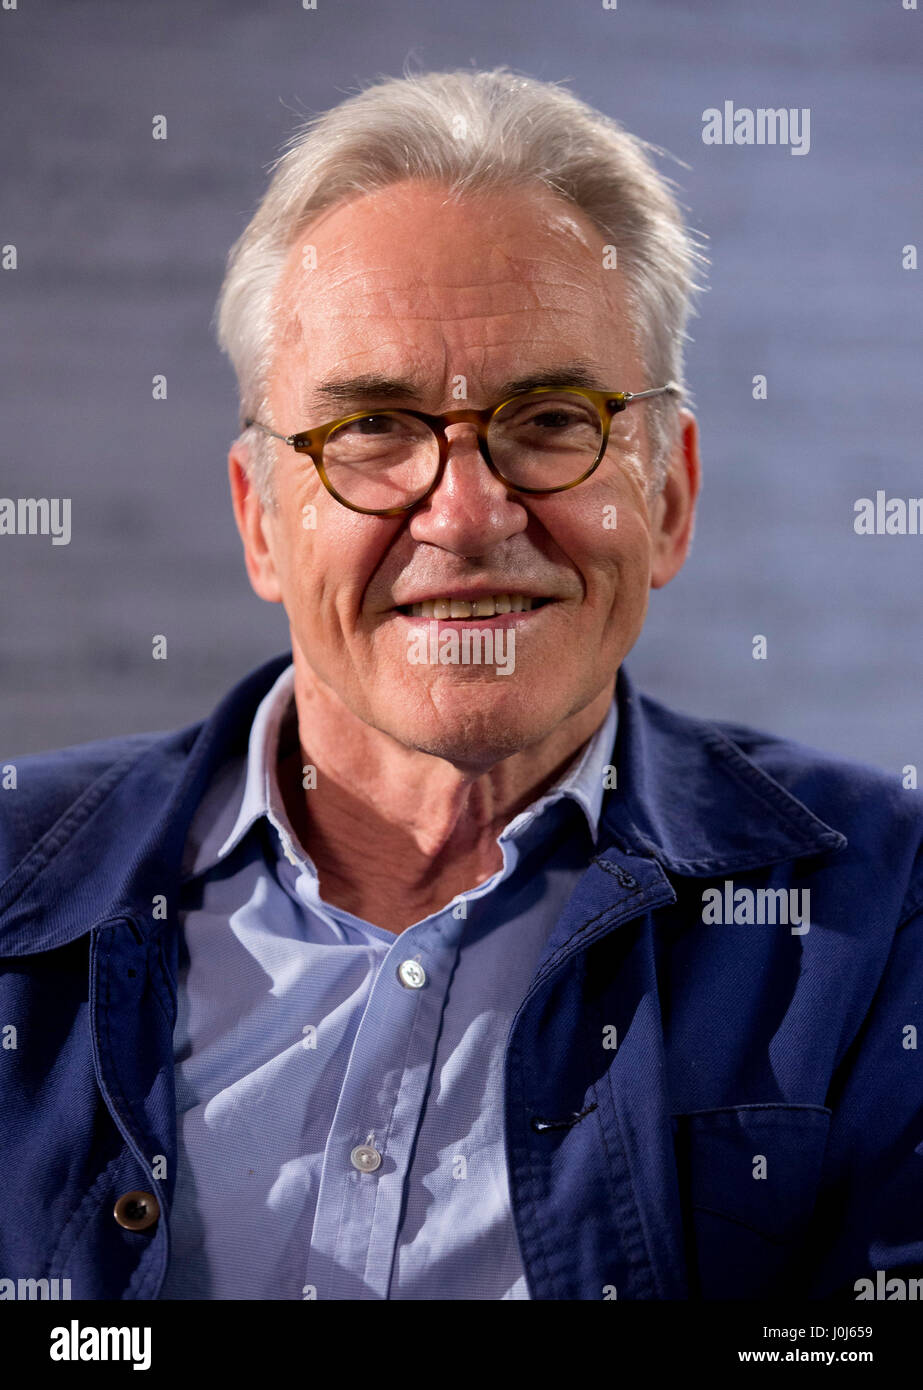 The Hatton Garden Job cast member Larry Lamb during a BUILD Series LDN event at the Capper Street Studio in London. Stock Photo